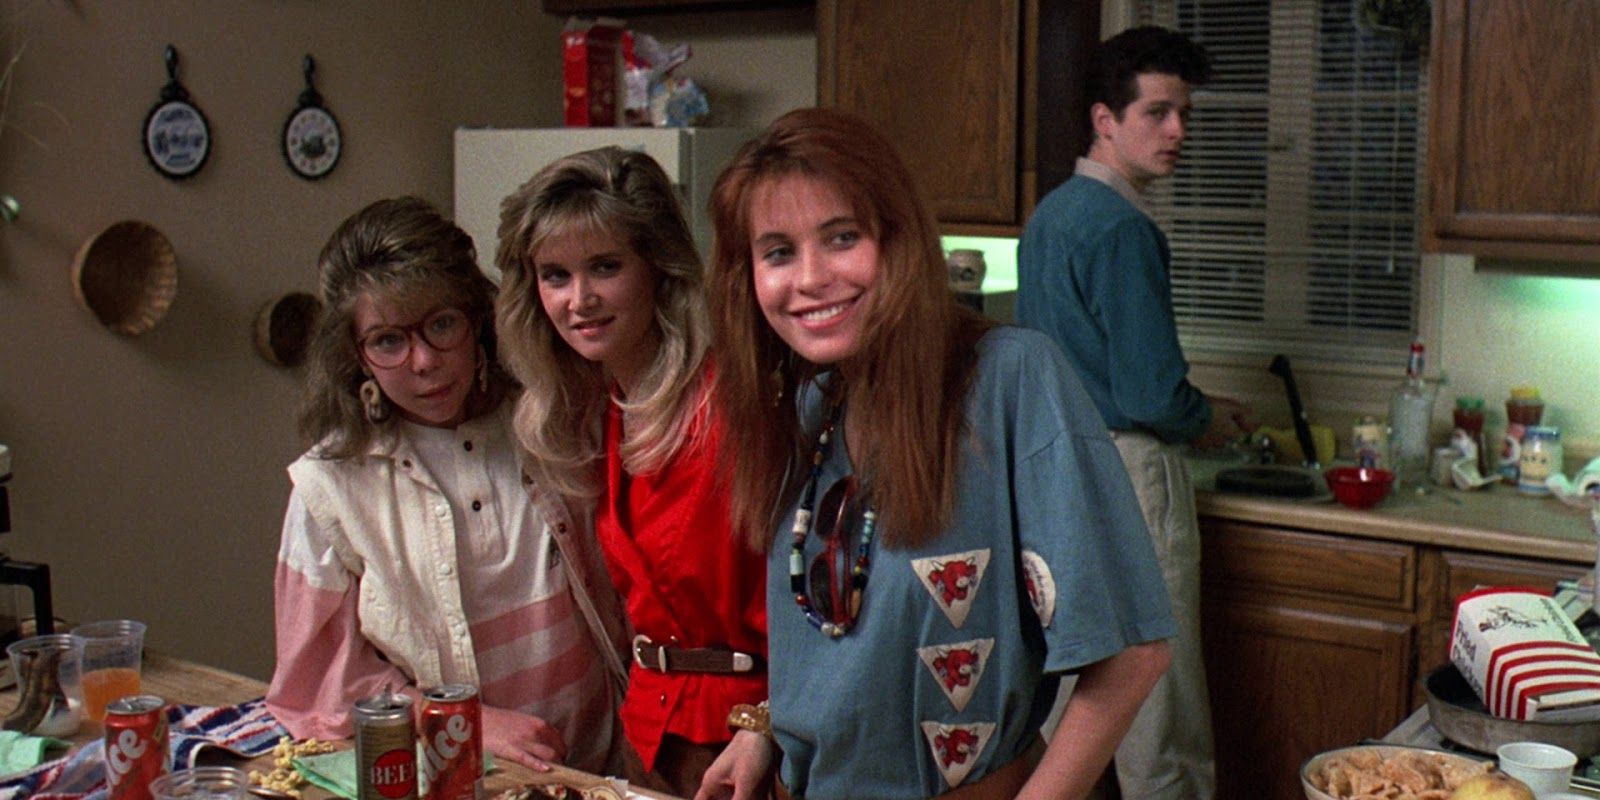 Madison, Sandra, Robin, And Russel In The Kitchen - Friday The 13th Part VII: The New Blood